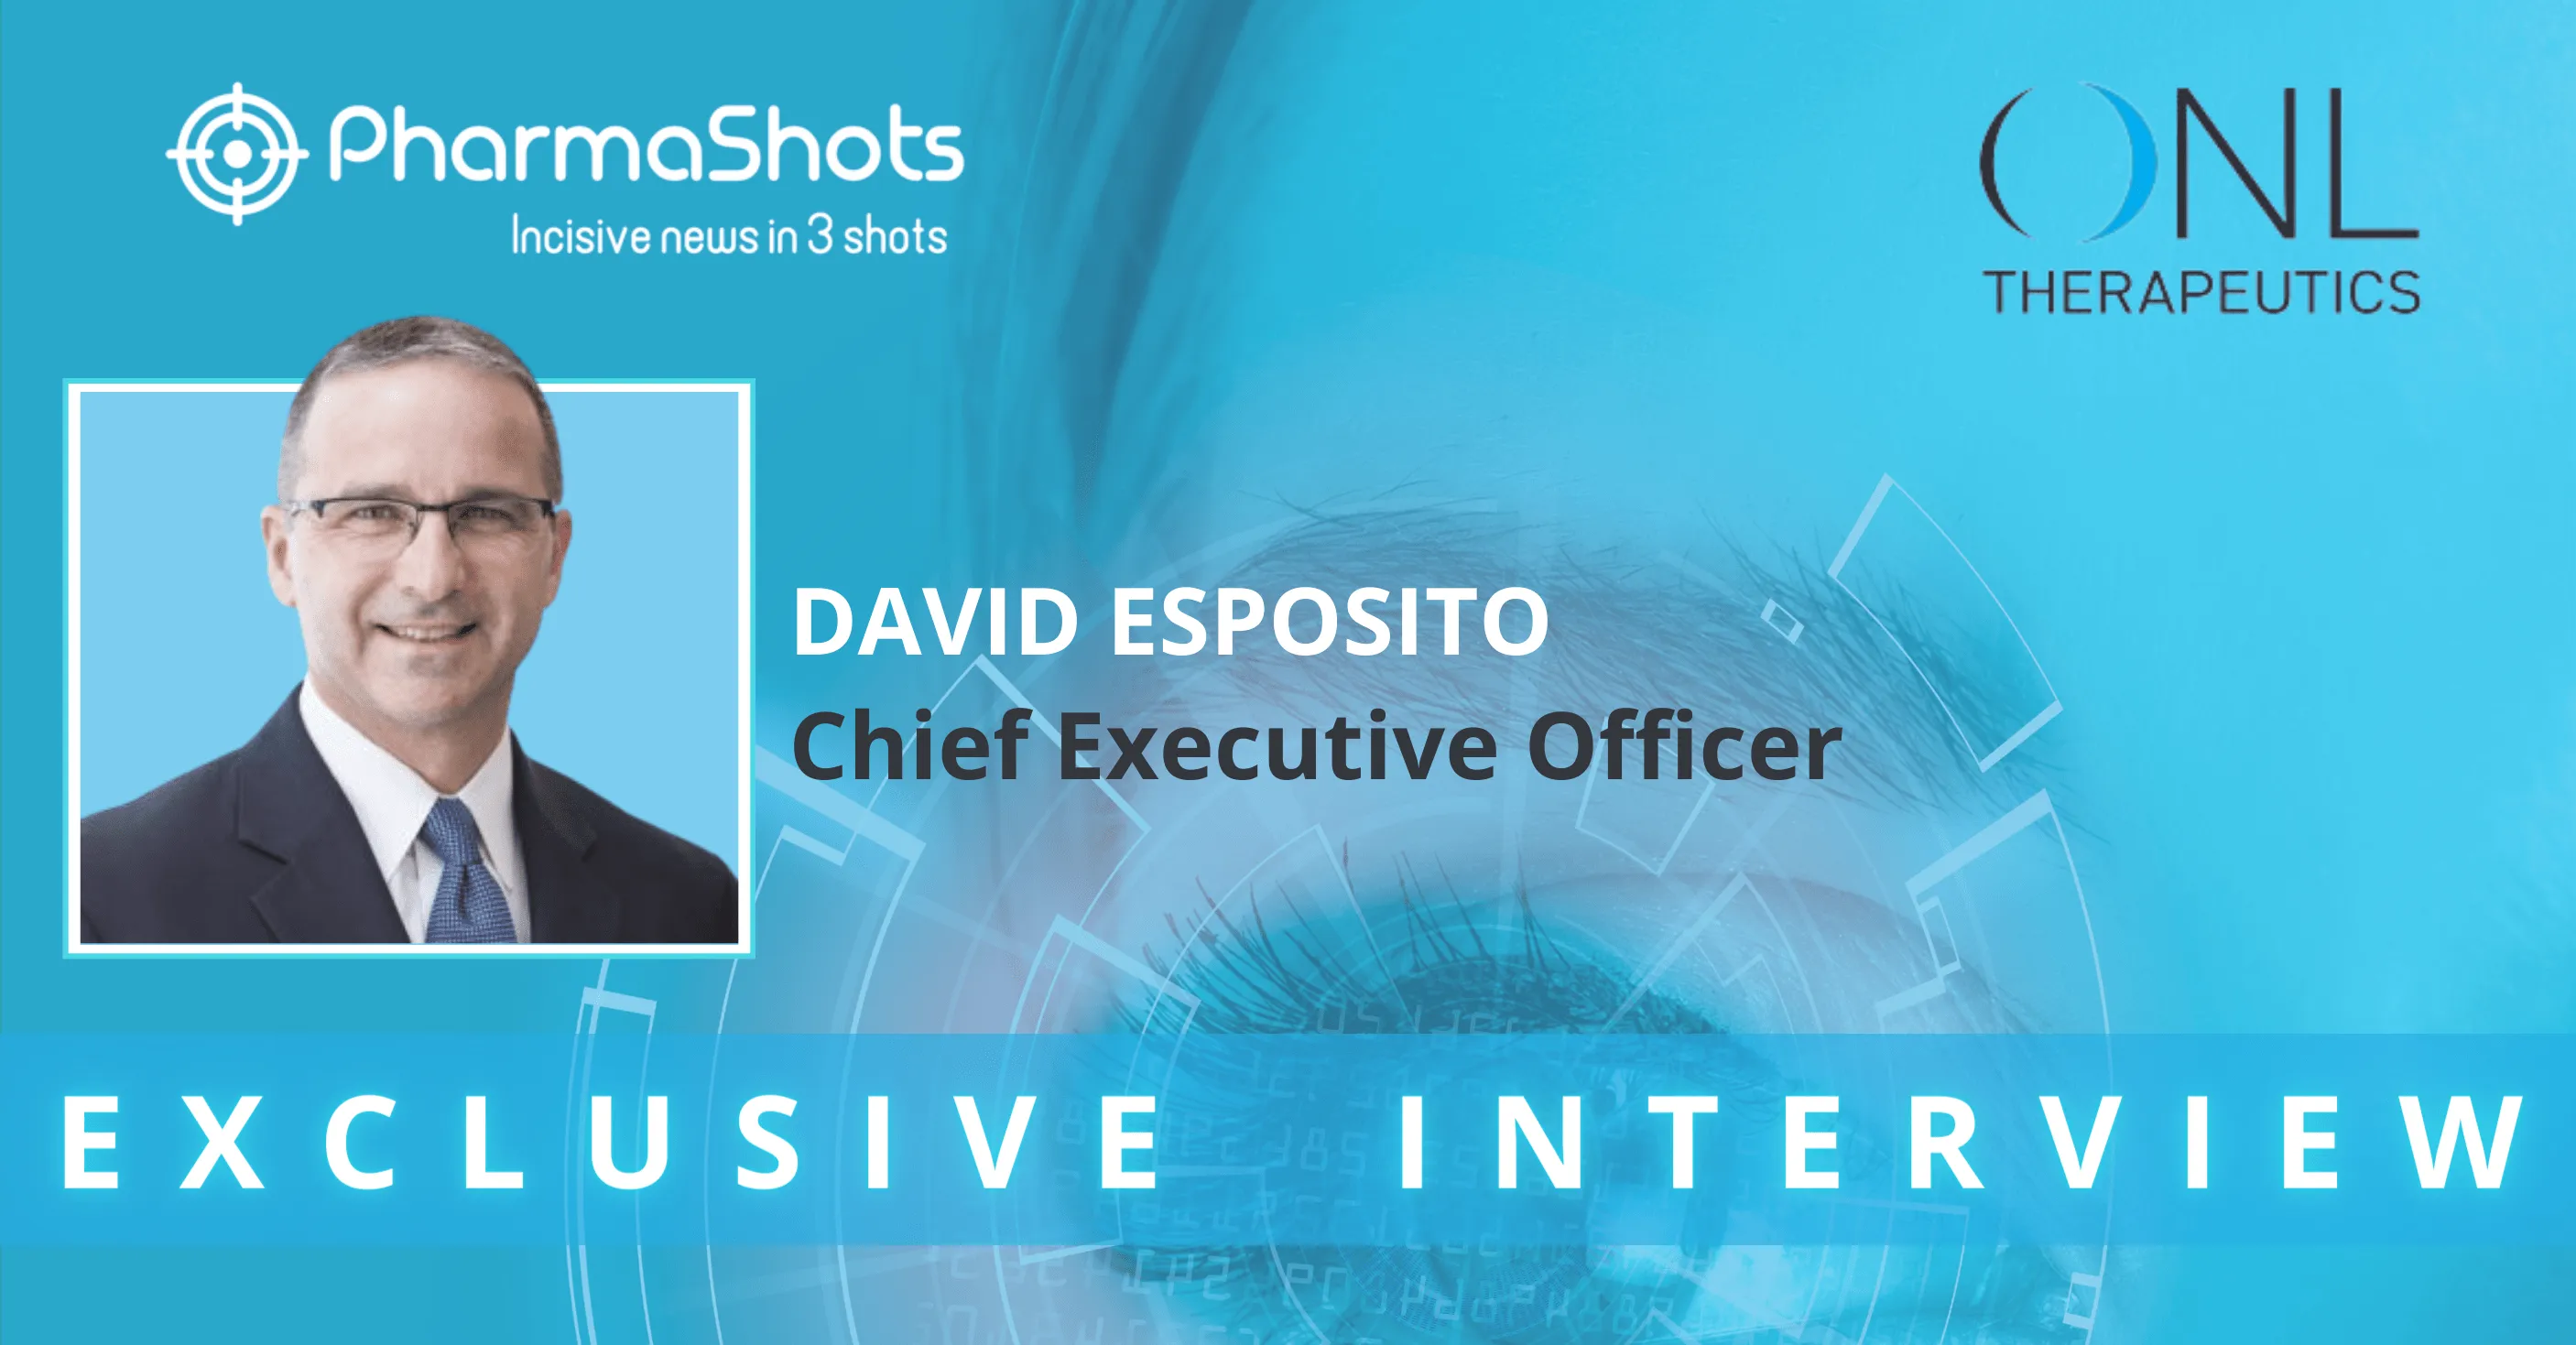 Exclusive: David Esposito in an Illuminating Discussion with PharmaShots